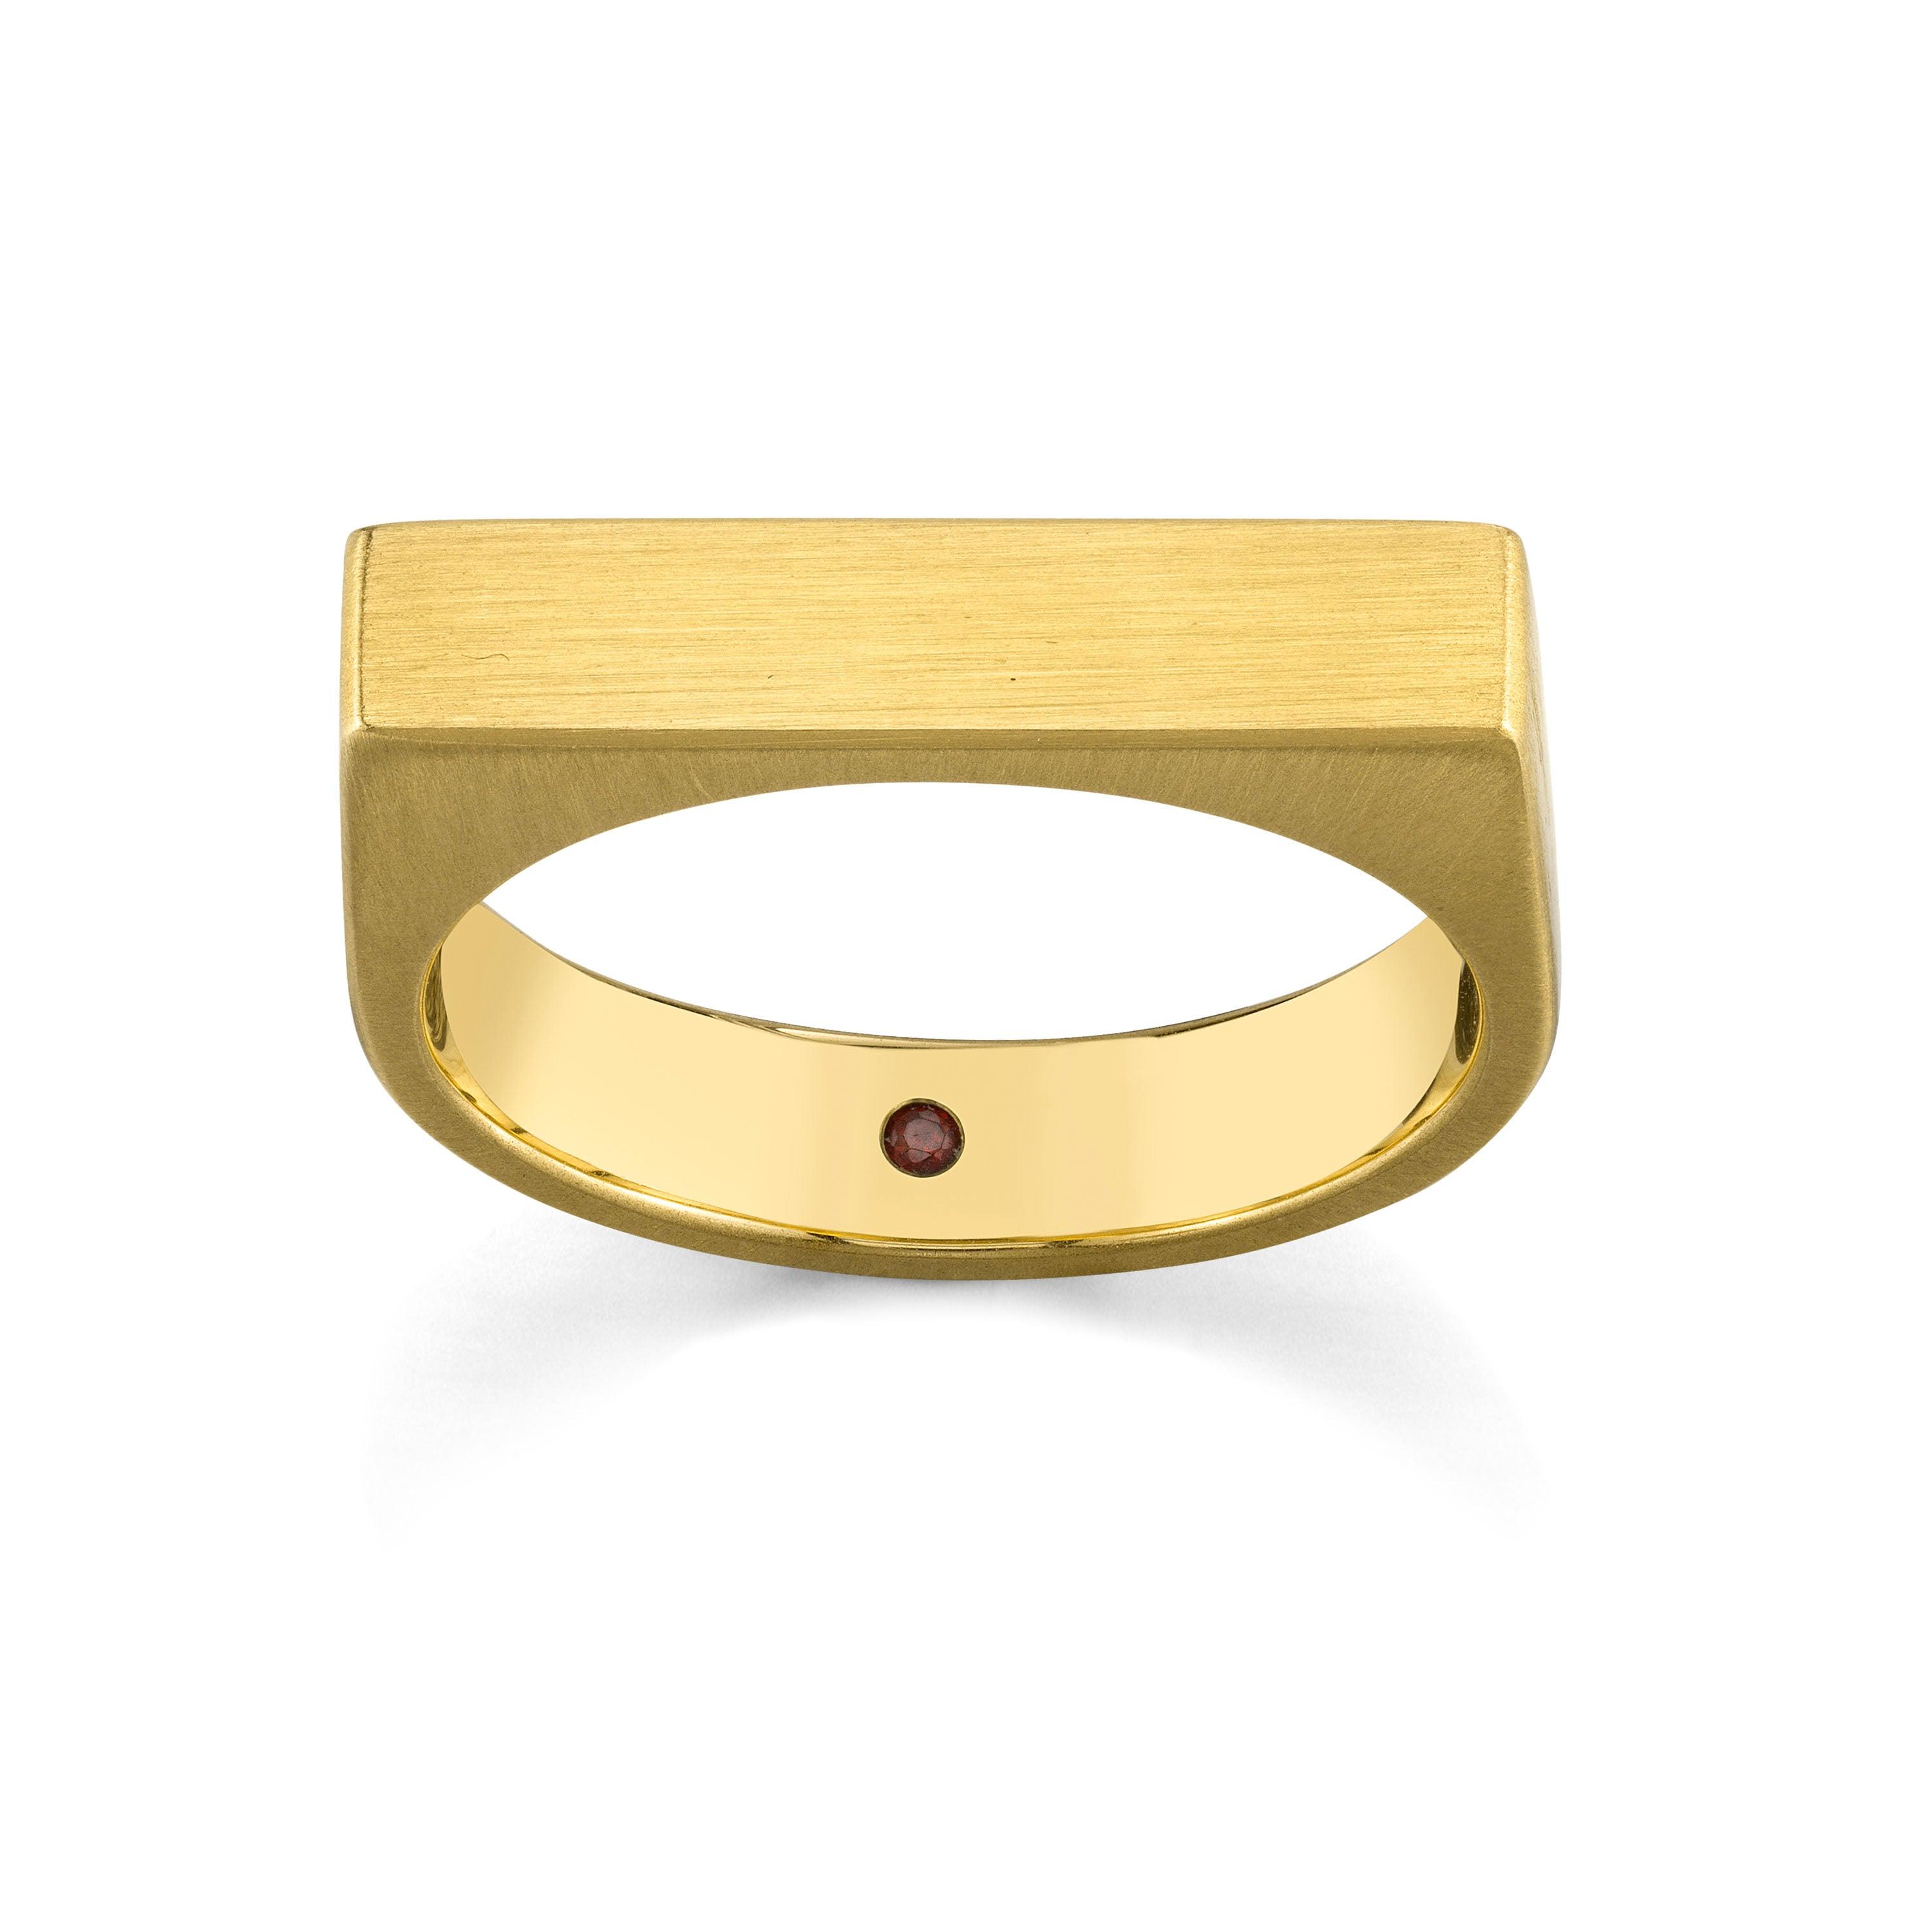 Marrow Fine Jewelry Brushed Metal Edgy High Profile Solid Gold Mens Wedding Band